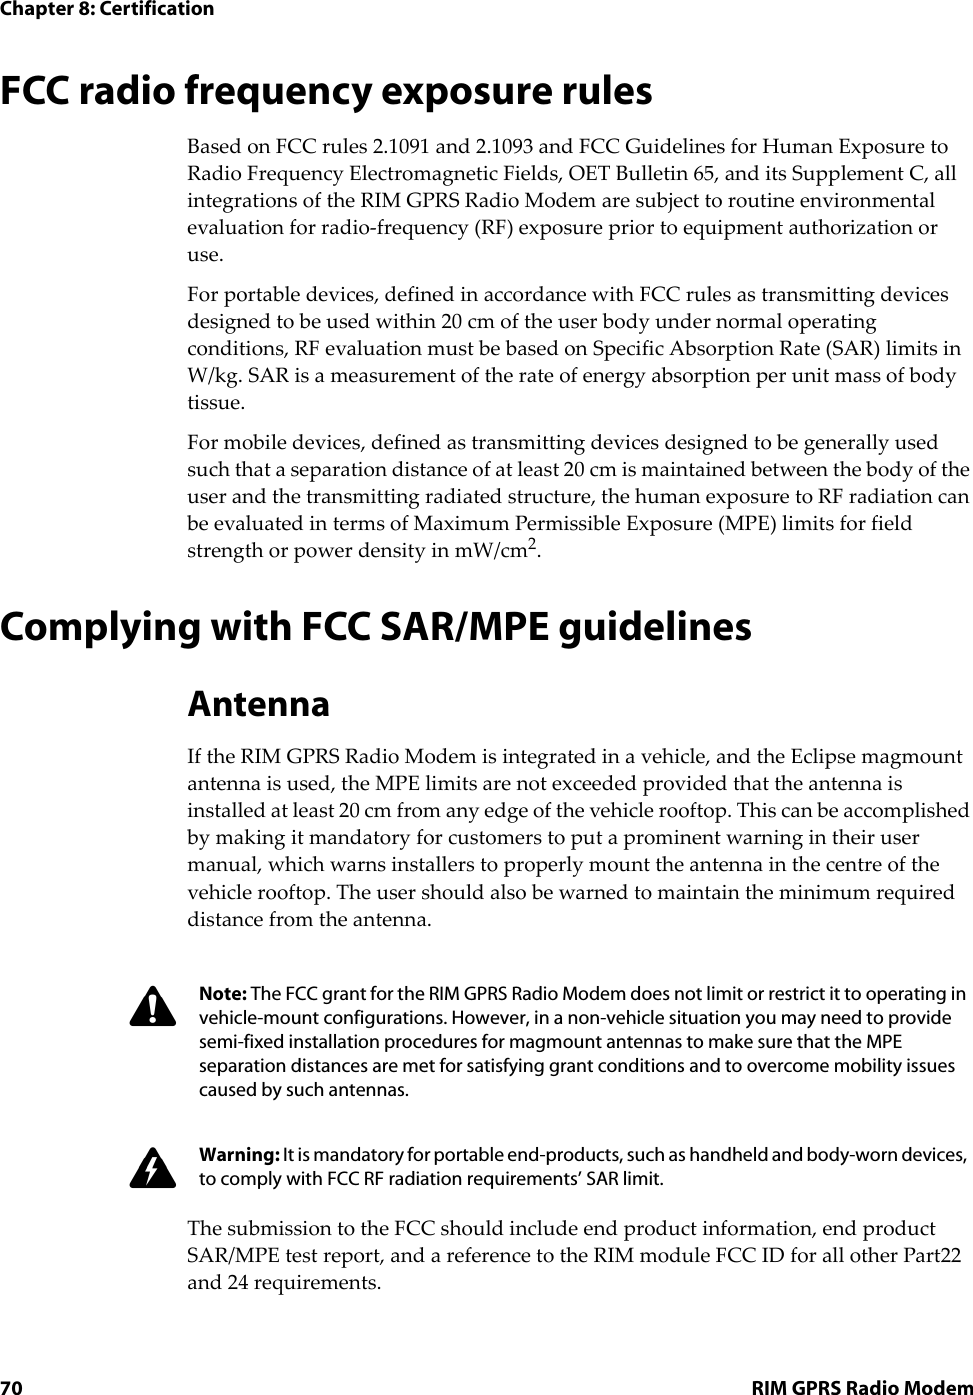 Chapter 8: Certification70 RIM GPRS Radio ModemFCC radio frequency exposure rulesBased on FCC rules 2.1091 and 2.1093 and FCC Guidelines for Human Exposure to Radio Frequency Electromagnetic Fields, OET Bulletin 65, and its Supplement C, all integrations of the RIM GPRS Radio Modem are subject to routine environmental evaluation for radio-frequency (RF) exposure prior to equipment authorization or use.For portable devices, defined in accordance with FCC rules as transmitting devices designed to be used within 20 cm of the user body under normal operating conditions, RF evaluation must be based on Specific Absorption Rate (SAR) limits in W/kg. SAR is a measurement of the rate of energy absorption per unit mass of body tissue.For mobile devices, defined as transmitting devices designed to be generally used such that a separation distance of at least 20 cm is maintained between the body of the user and the transmitting radiated structure, the human exposure to RF radiation can be evaluated in terms of Maximum Permissible Exposure (MPE) limits for field strength or power density in mW/cm2.Complying with FCC SAR/MPE guidelinesAntennaIf the RIM GPRS Radio Modem is integrated in a vehicle, and the Eclipse magmount antenna is used, the MPE limits are not exceeded provided that the antenna is installed at least 20 cm from any edge of the vehicle rooftop. This can be accomplished by making it mandatory for customers to put a prominent warning in their user manual, which warns installers to properly mount the antenna in the centre of the vehicle rooftop. The user should also be warned to maintain the minimum required distance from the antenna.The submission to the FCC should include end product information, end product SAR/MPE test report, and a reference to the RIM module FCC ID for all other Part22 and 24 requirements.Note: The FCC grant for the RIM GPRS Radio Modem does not limit or restrict it to operating in vehicle-mount configurations. However, in a non-vehicle situation you may need to provide semi-fixed installation procedures for magmount antennas to make sure that the MPE separation distances are met for satisfying grant conditions and to overcome mobility issues caused by such antennas.Warning: It is mandatory for portable end-products, such as handheld and body-worn devices, to comply with FCC RF radiation requirements’ SAR limit.